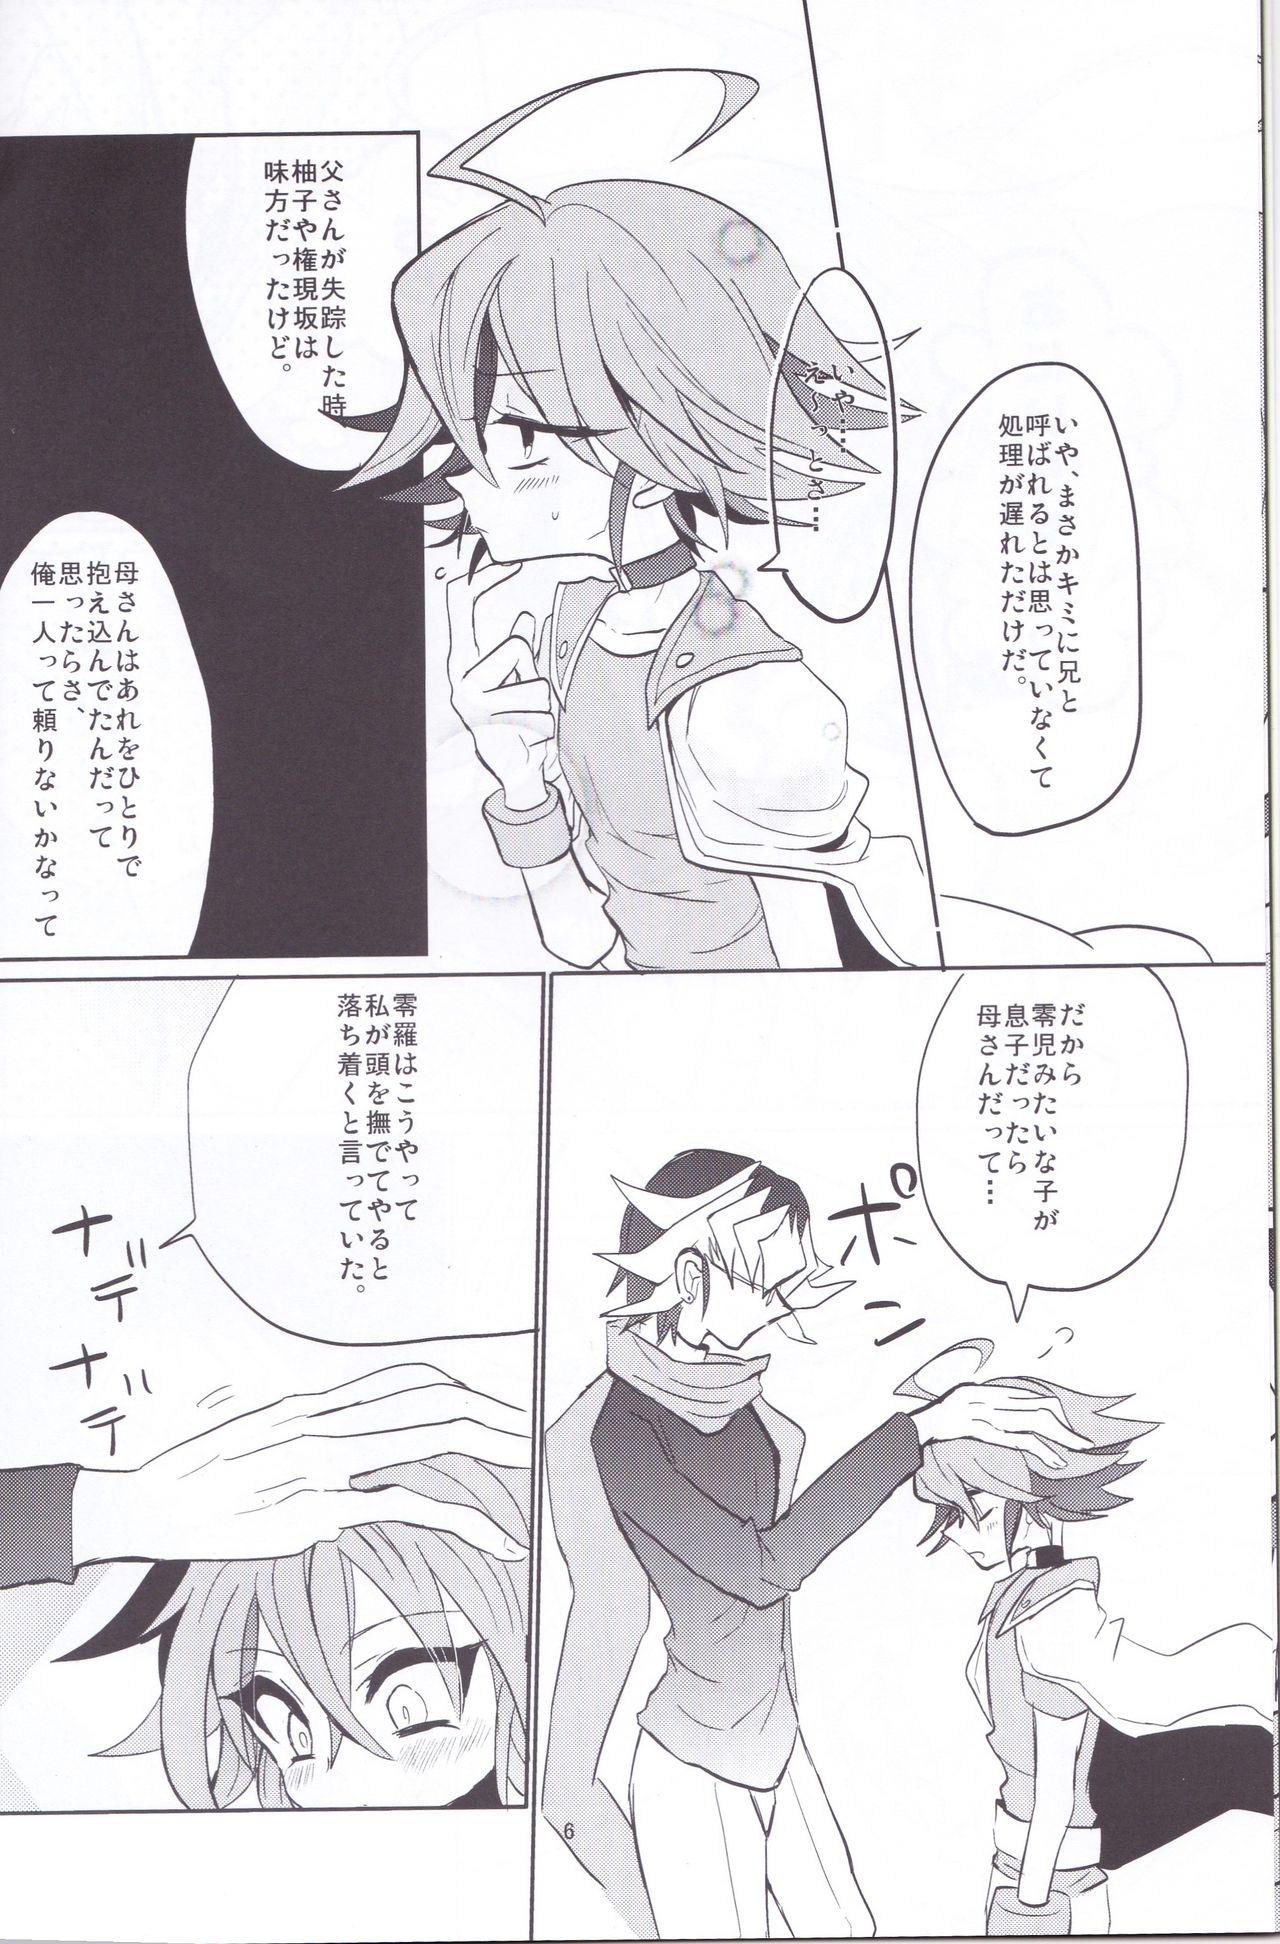 Outdoor Amai Kankei - Yu gi oh arc v Swallowing - Page 7